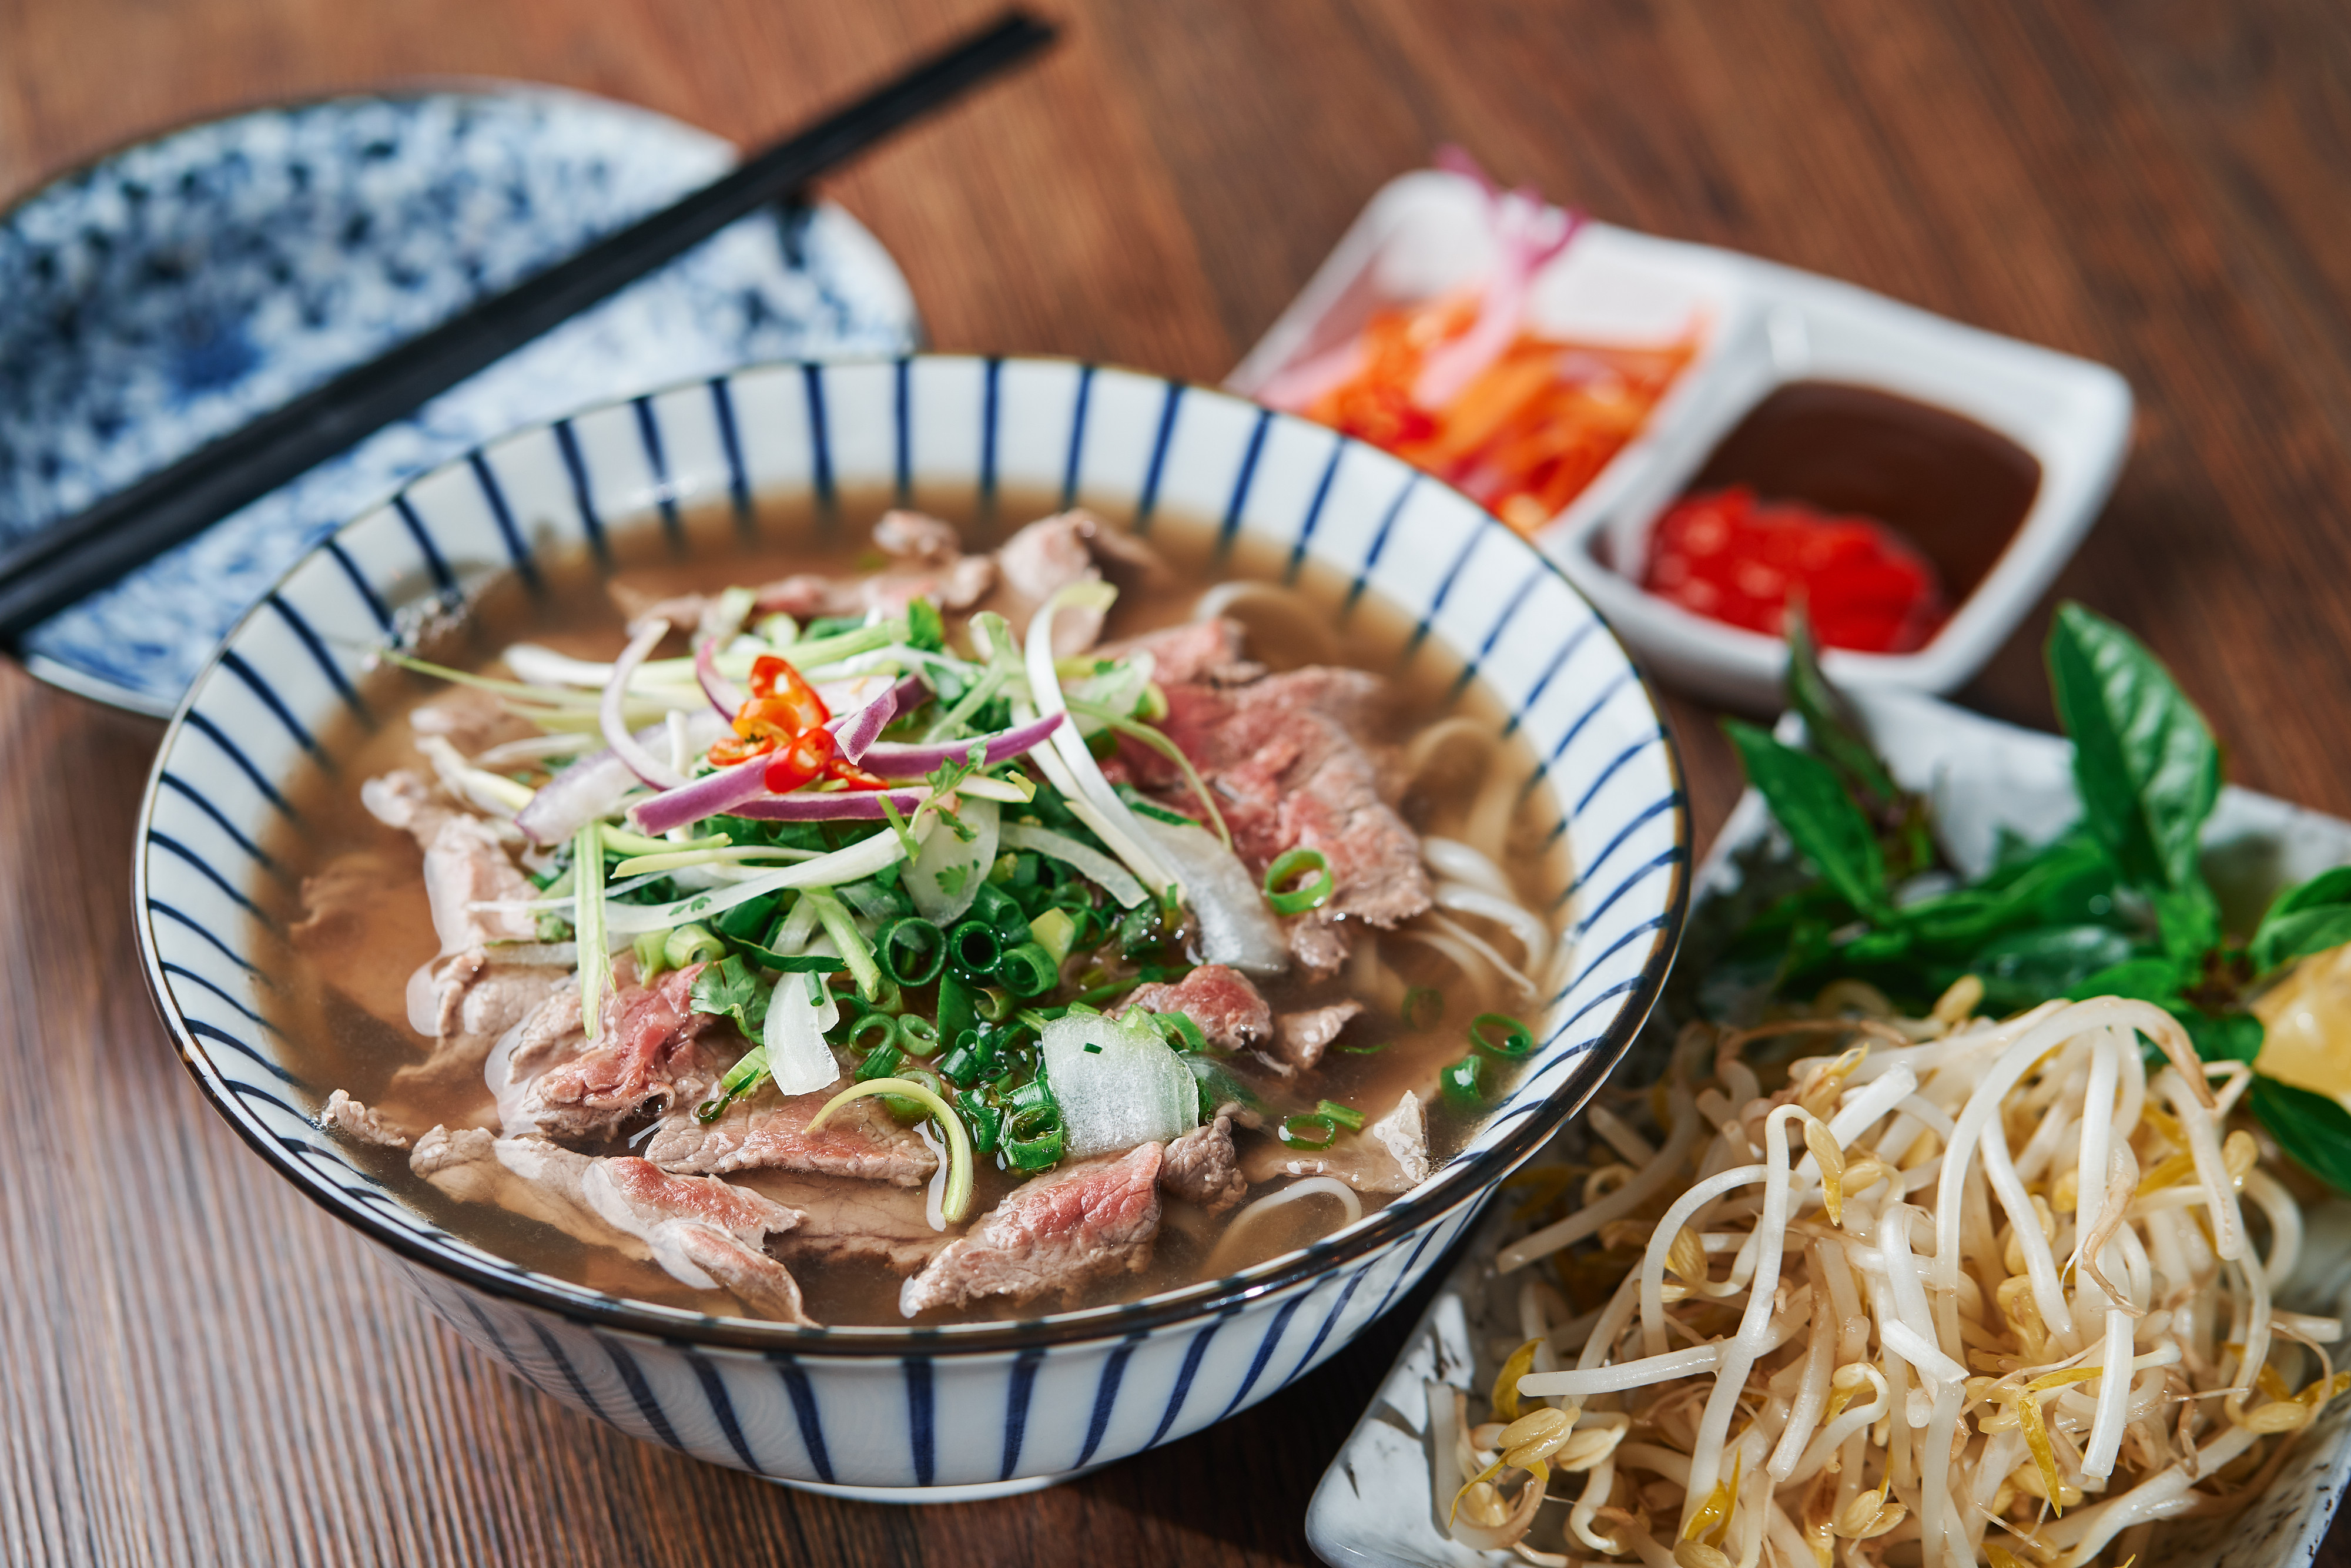 A casual restaurant serving Vietnamese pho is one of columnist Andrew Sun’s favourites. There are too many restaurants in Hong Kong for anyone to eat at them all, he says, and who would want to? Photo: Shutterstock